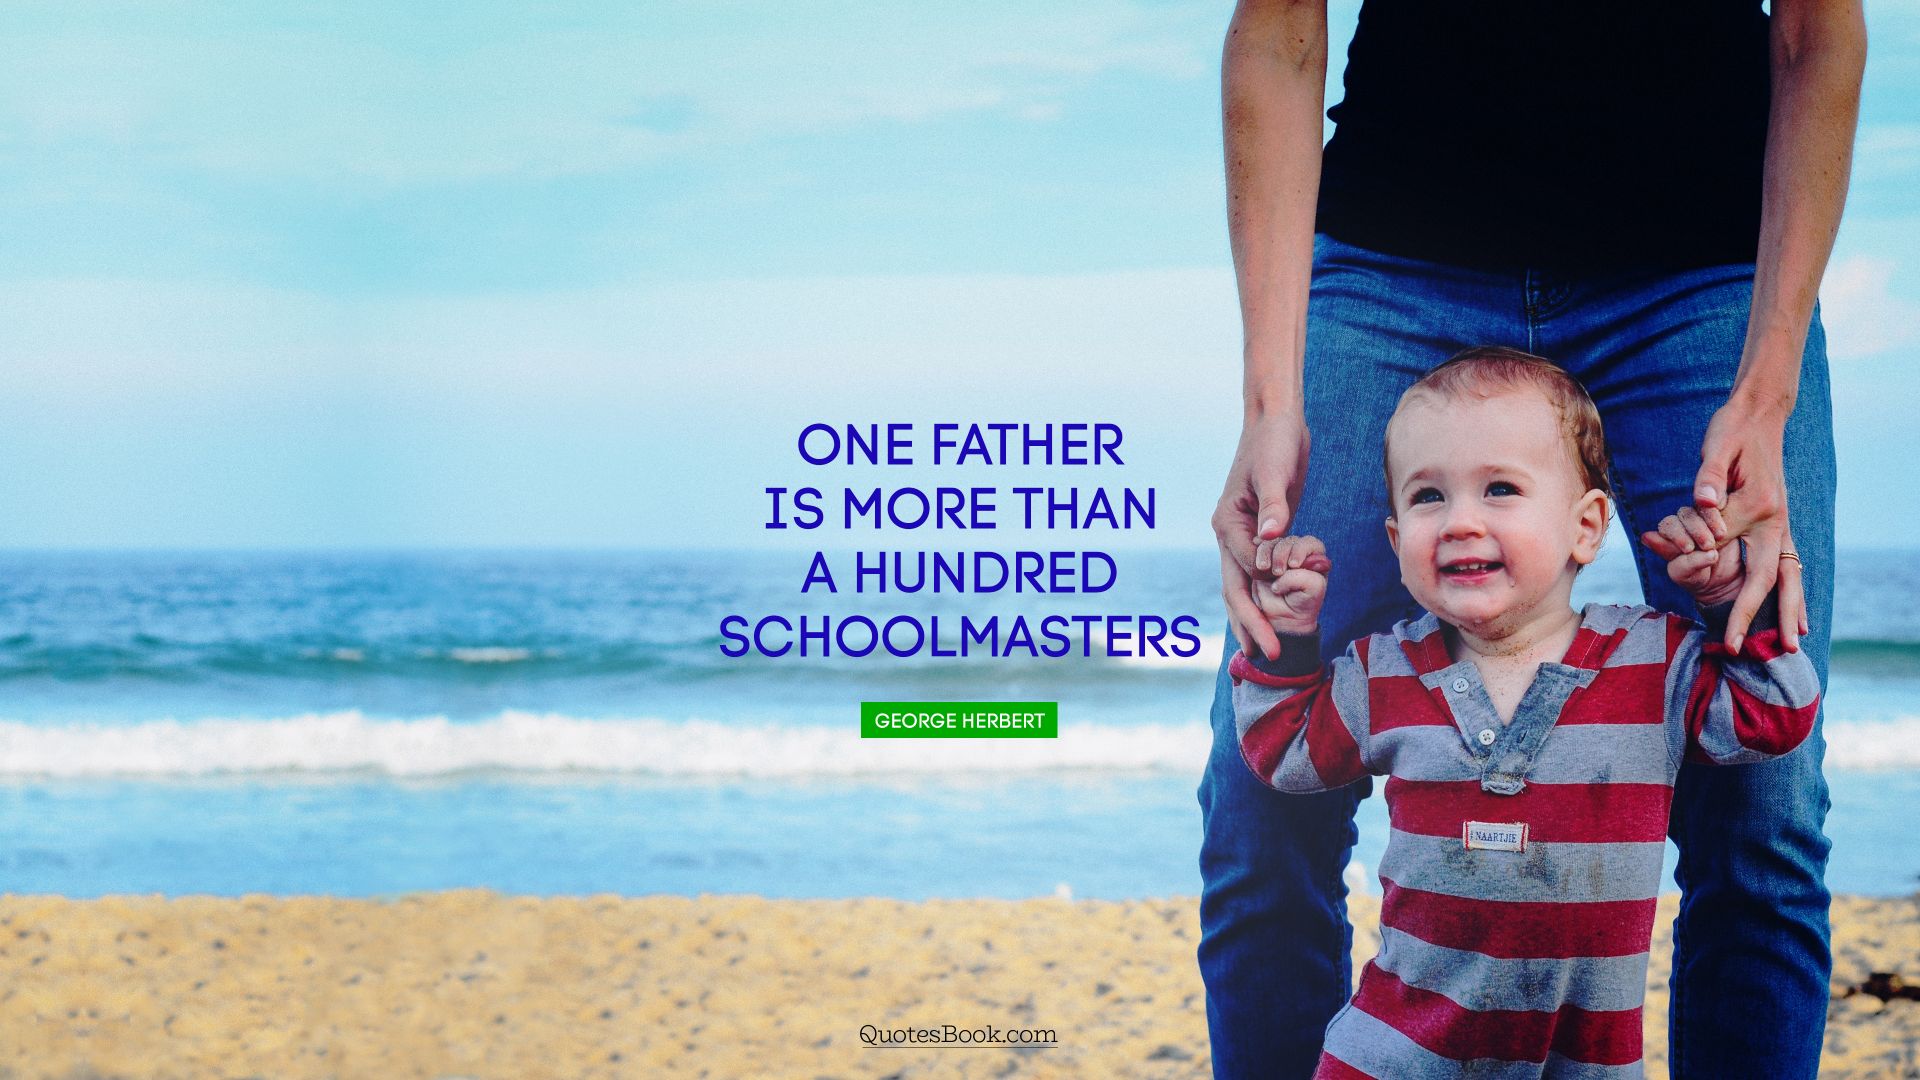 One father is more than a hundred schoolmasters. - Quote by George Herbert